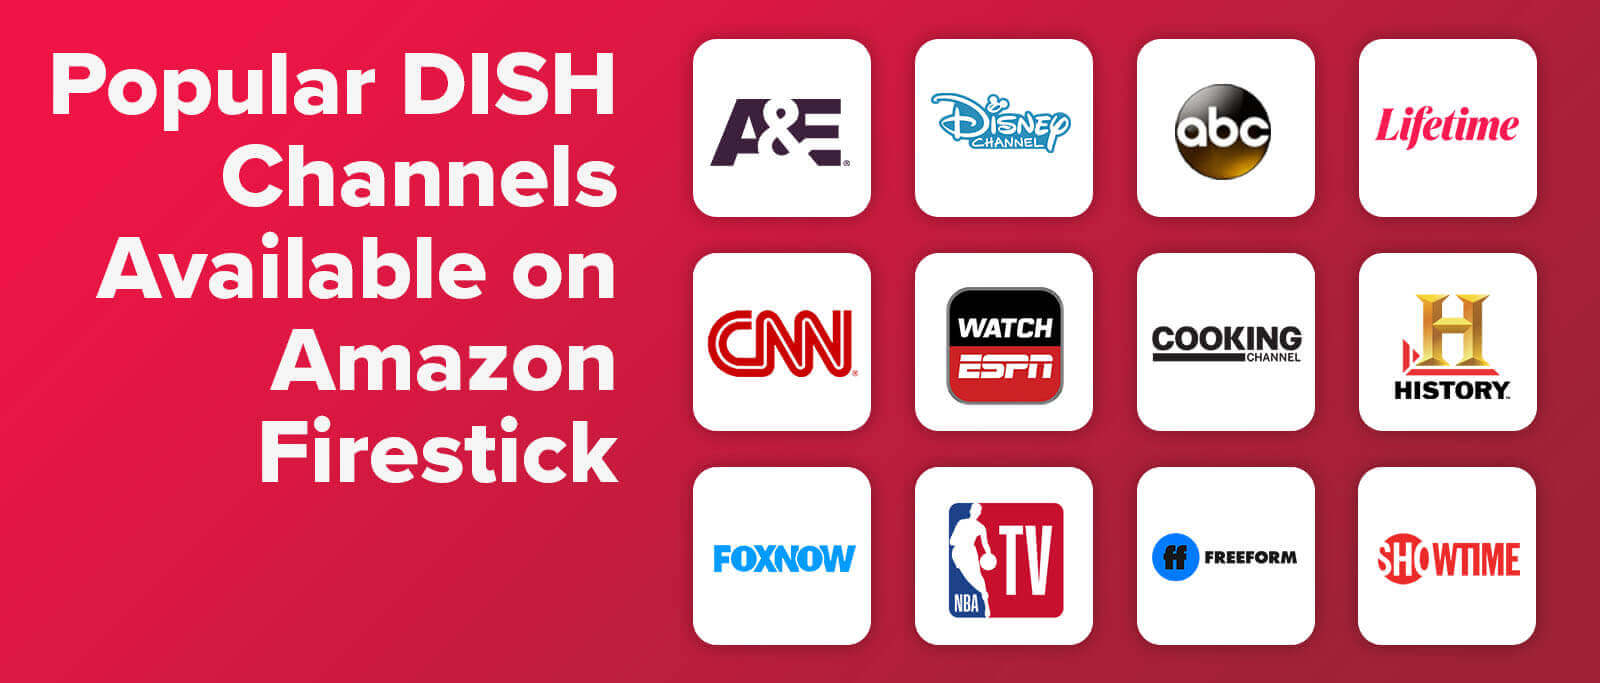 How to Install and Activate DISH Anywhere on Fire TV Stick